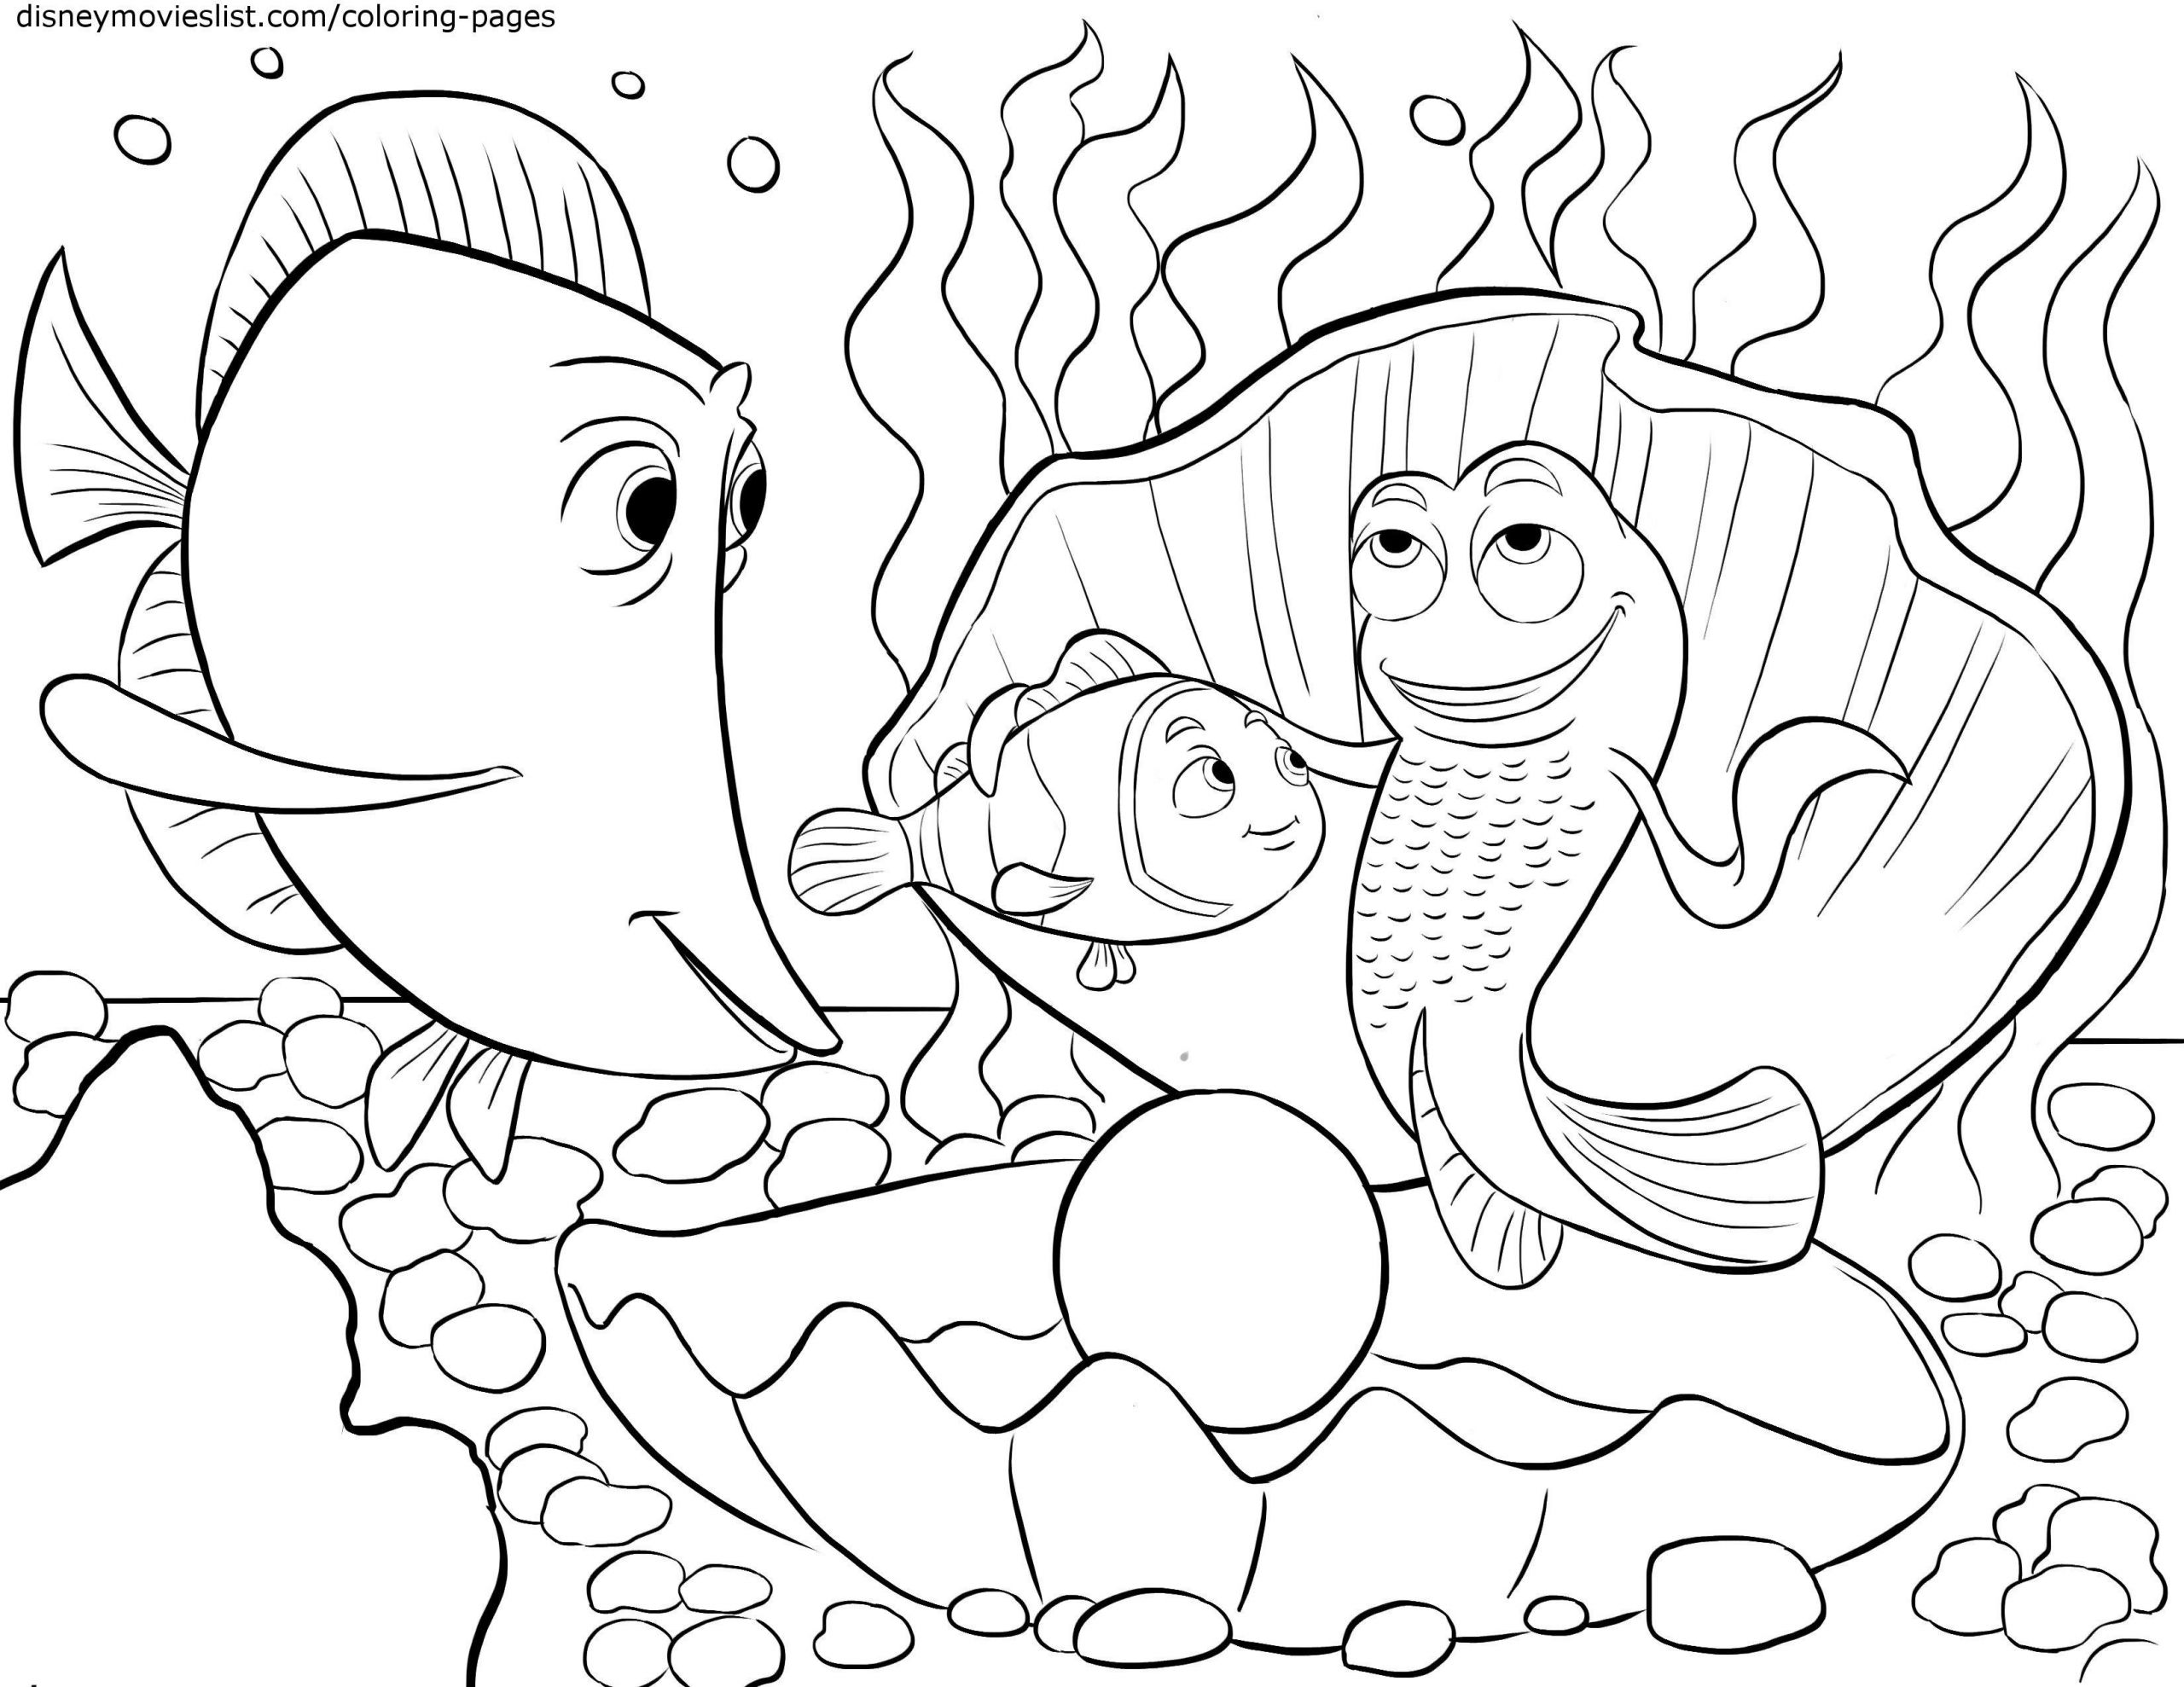 Coloring Sheets For Kids Pdf
 Coloring Pages Marvellous Coloring Pages For Kids Pdf